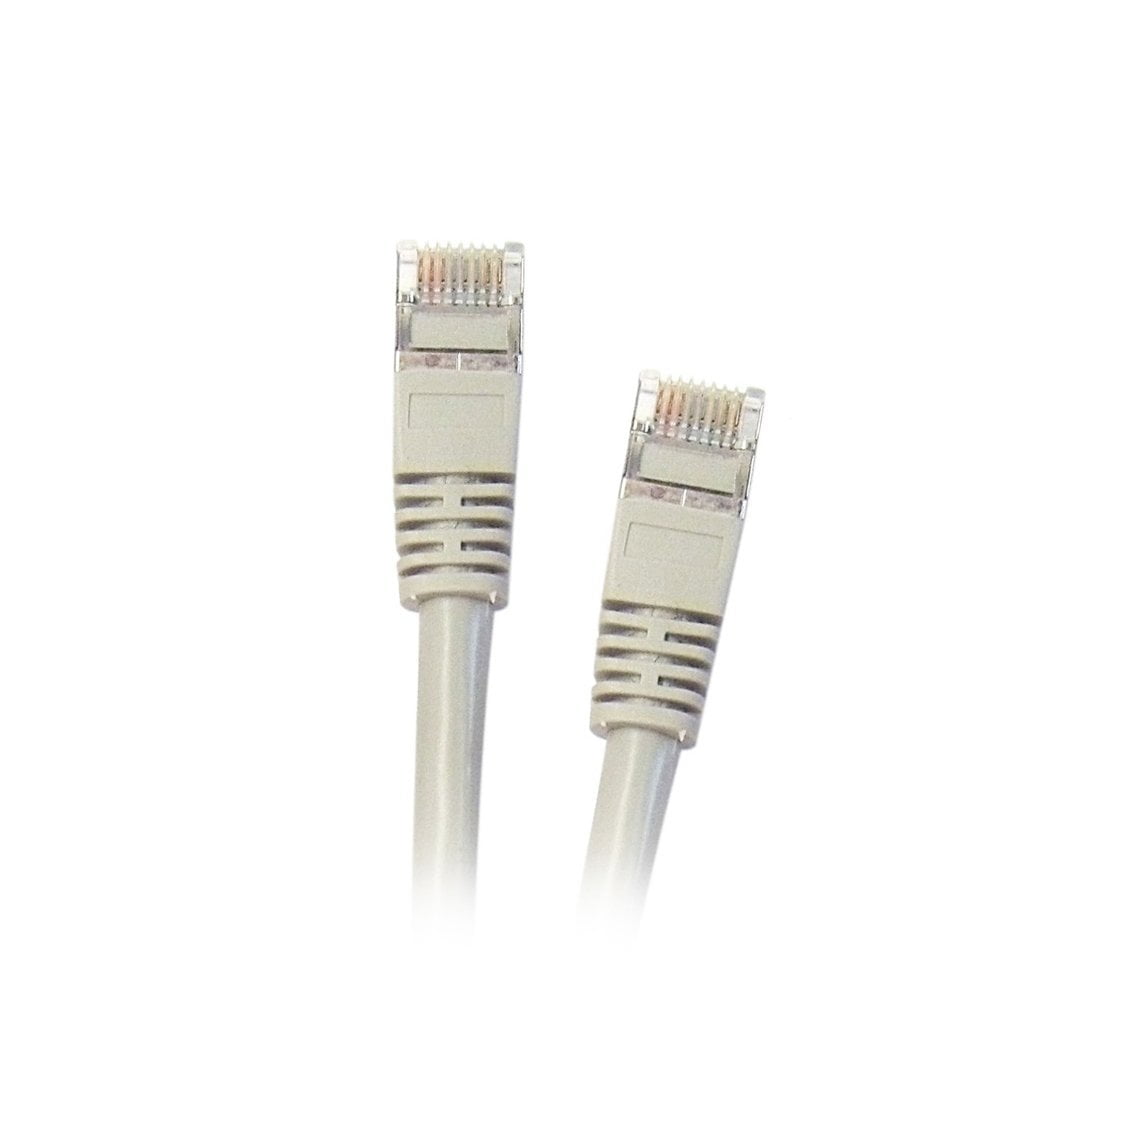 1 Feet/0.3 Meters eDragon Shielded Cat5e Ethernet Cable with Snagless/Molded Boot, Gray 